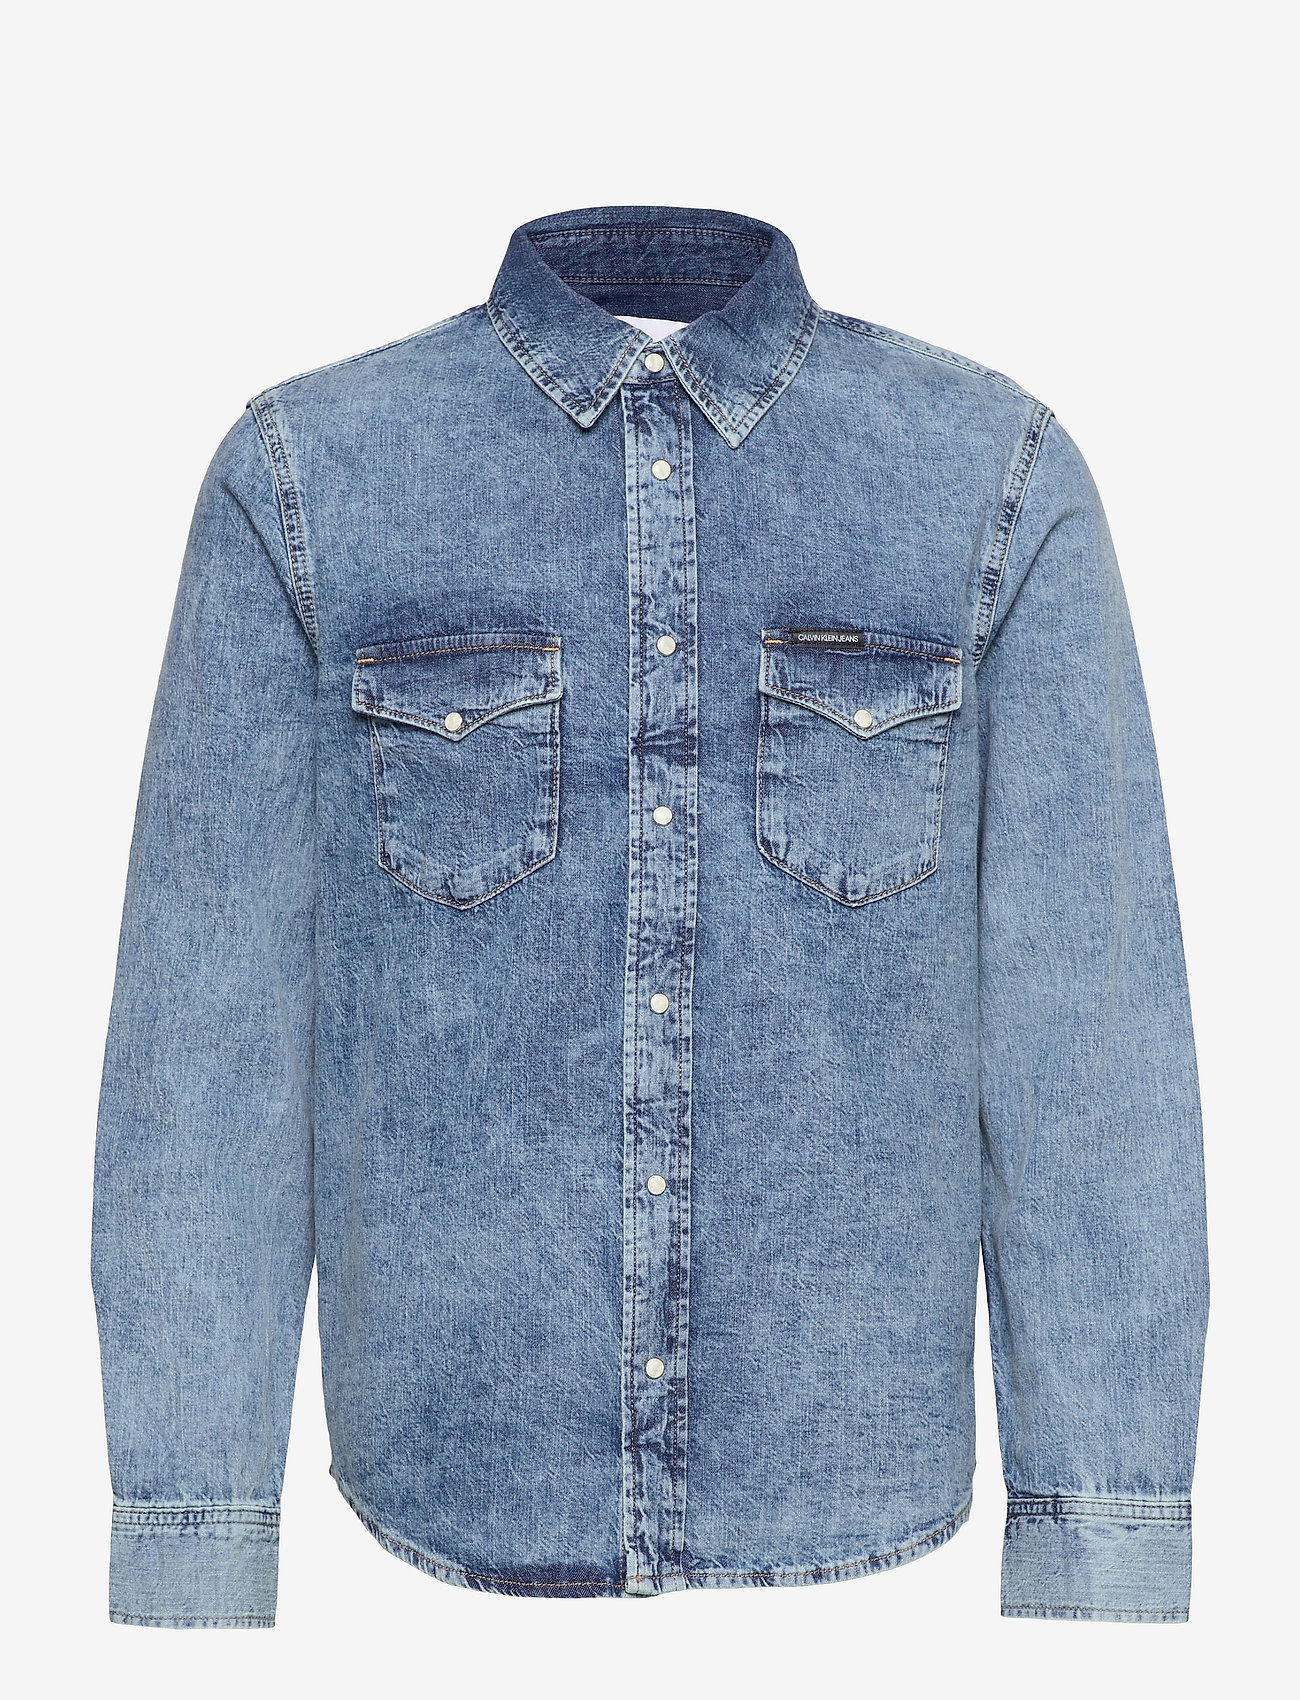 Smash declare for me Calvin Klein Modern Western Shirt Top Sellers, UP TO 54% OFF |  www.quirurgica.com